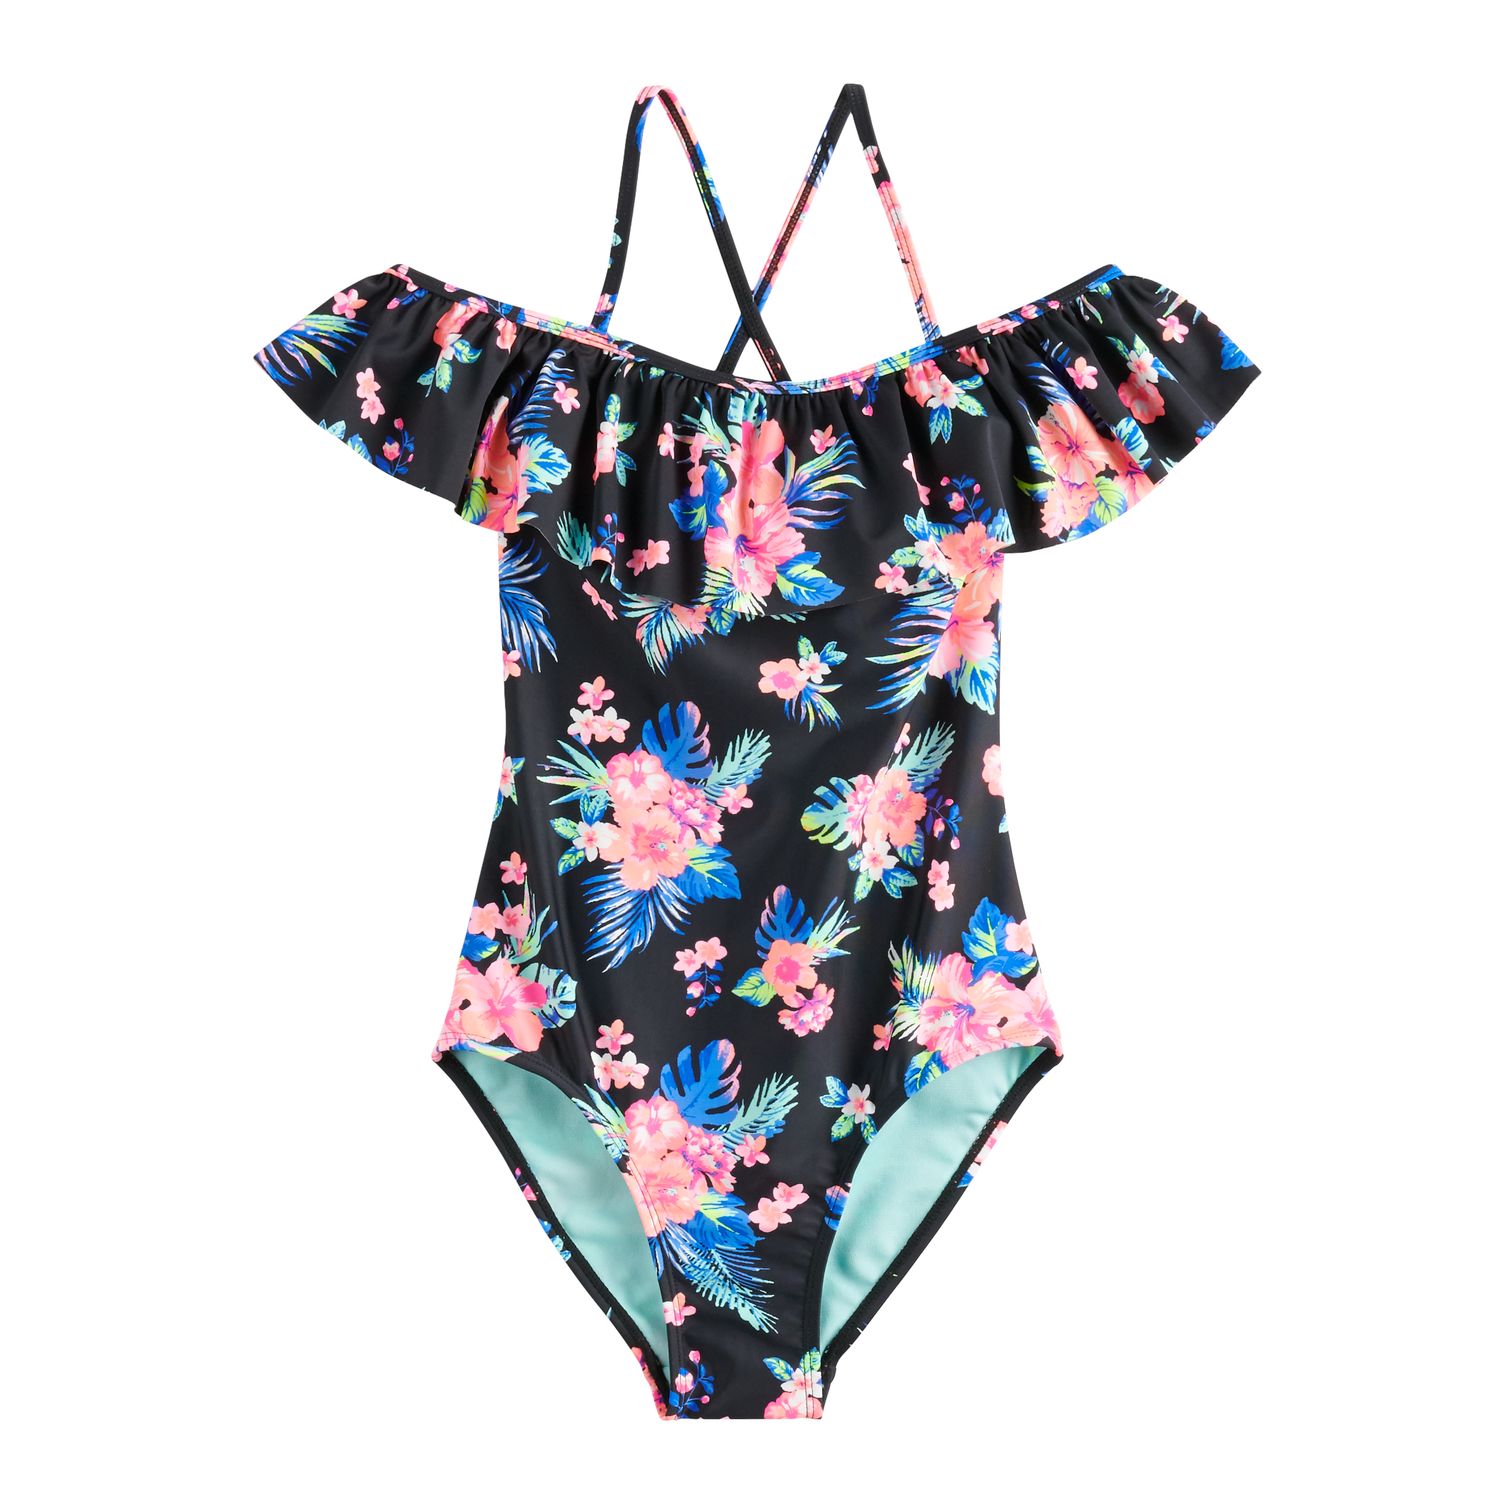 pretty bathing suits for girls